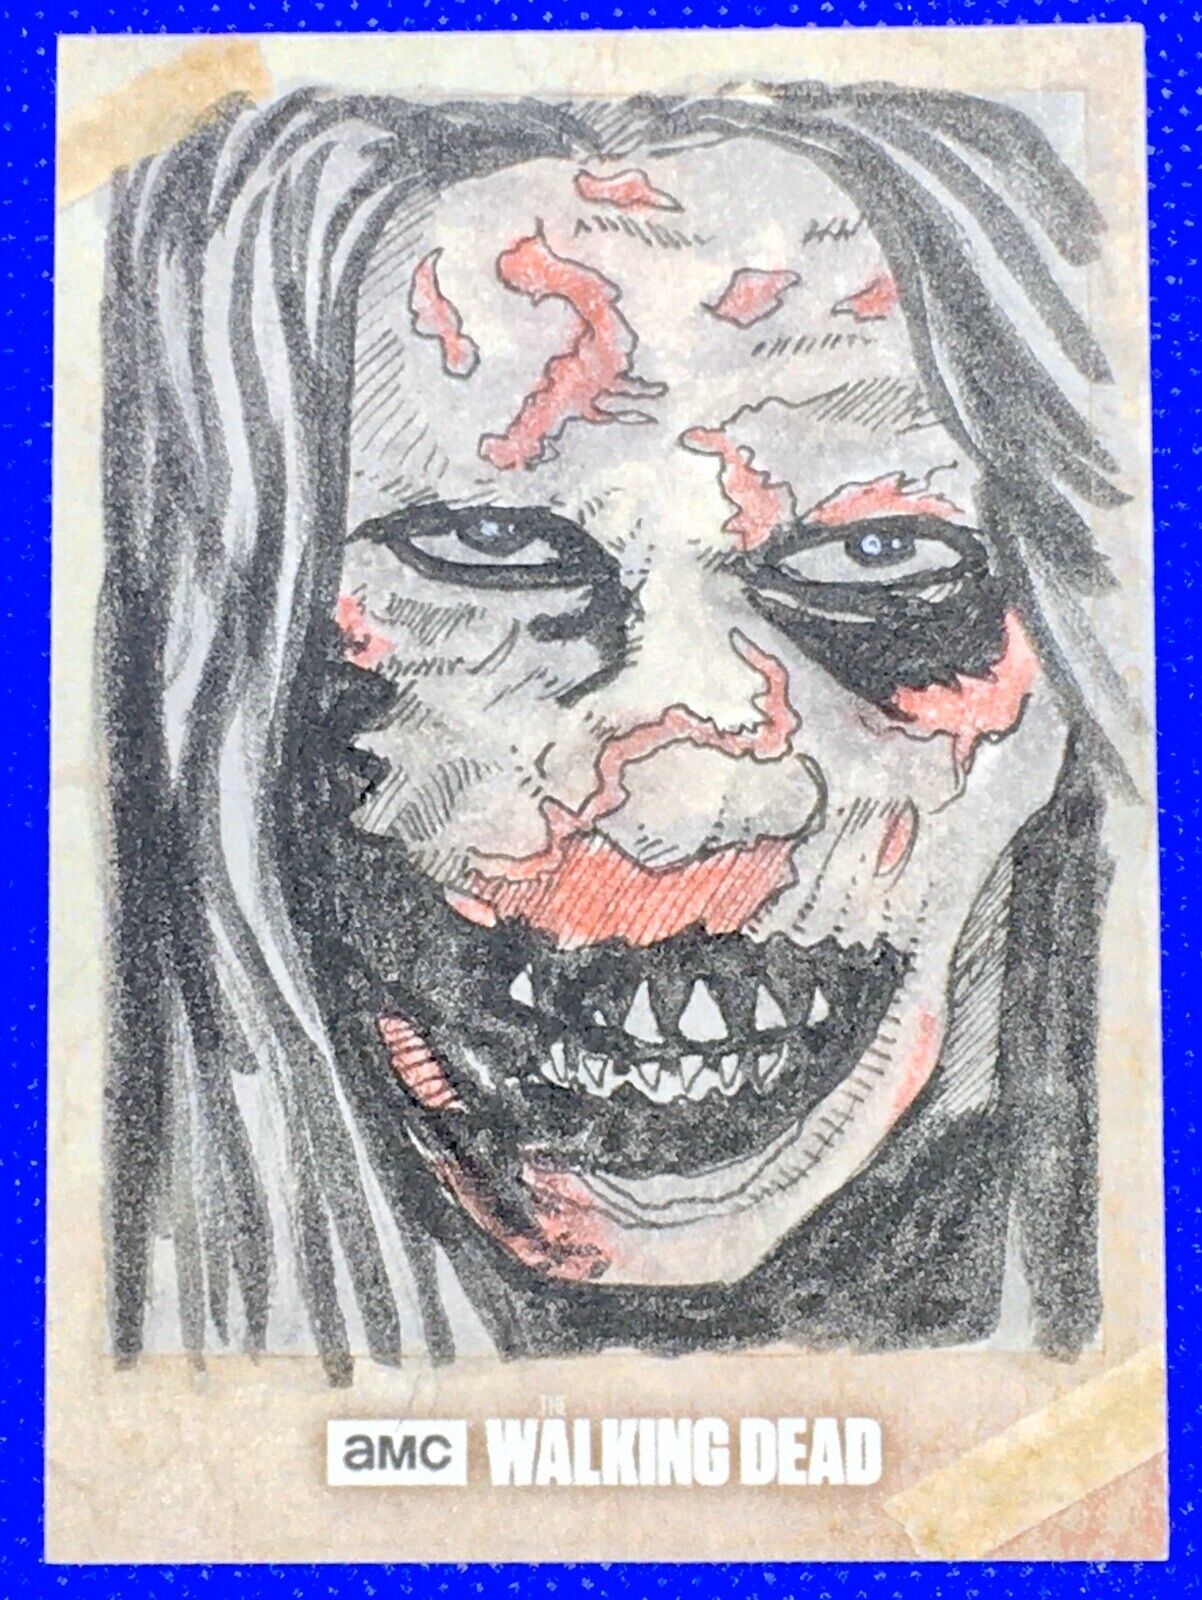 TOPPS AMC THE WALKING DEAD SKETCH CARD Zombie by Eddie Price 1/1